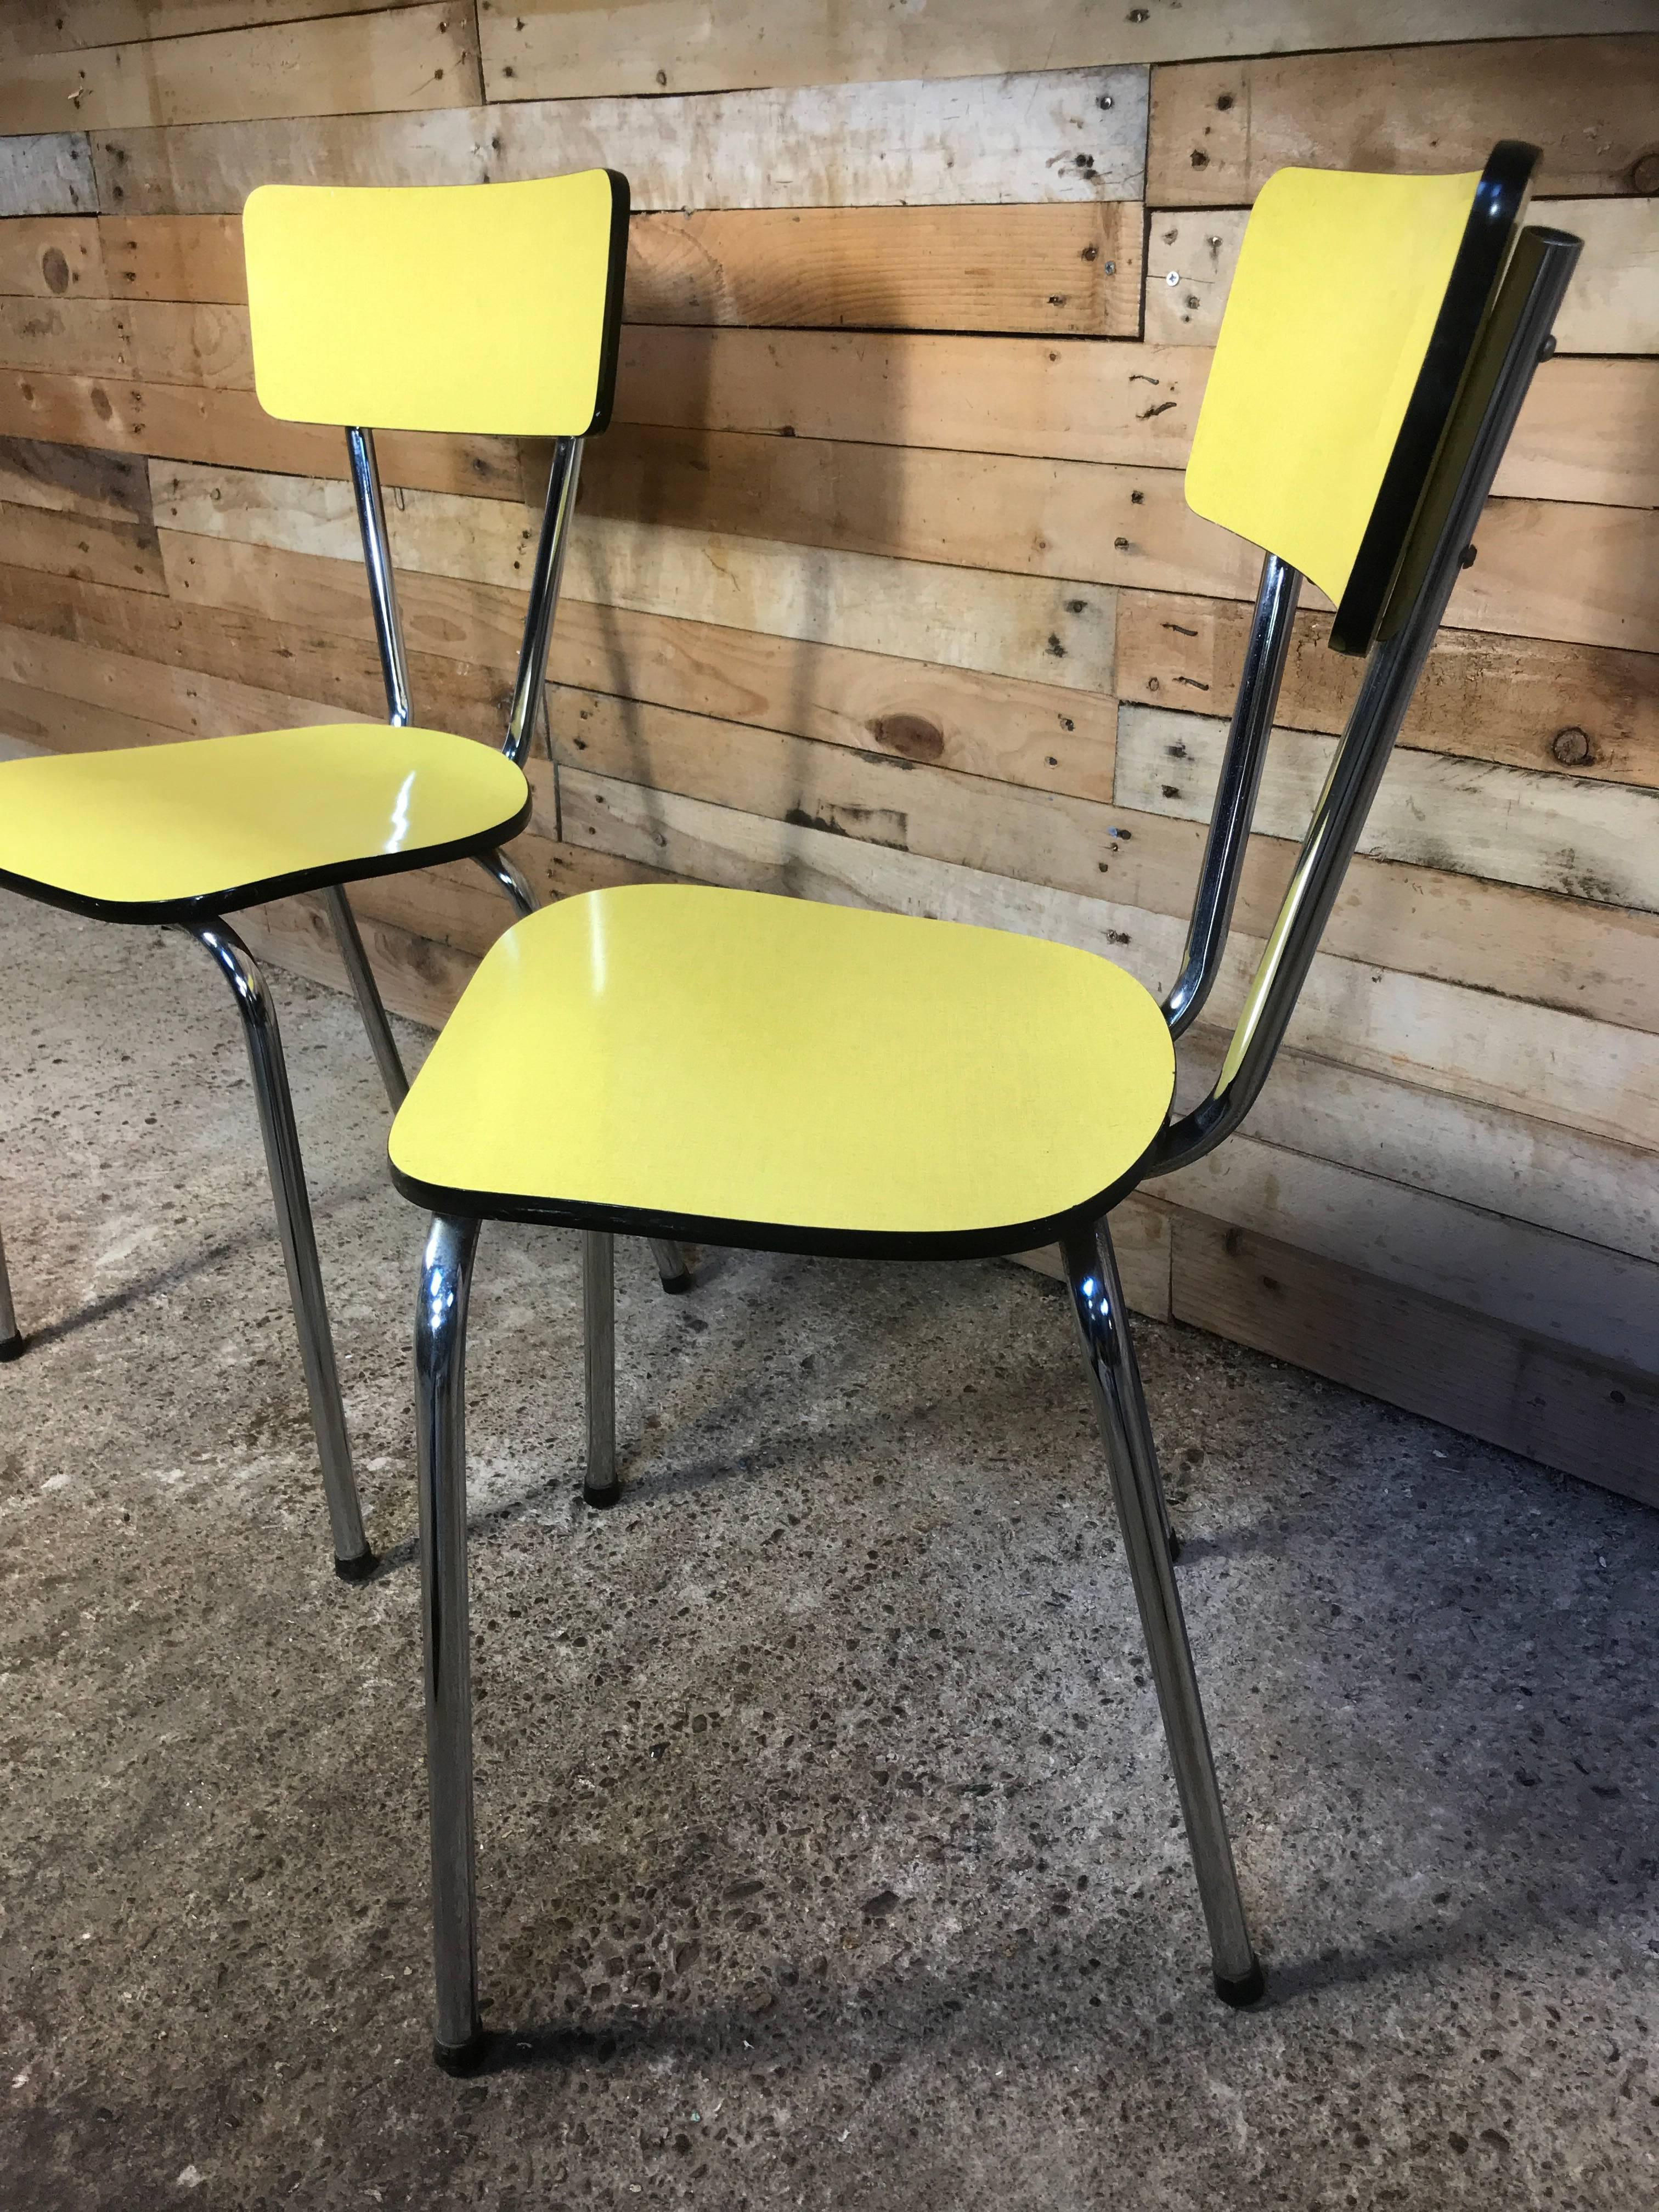 Dutch 1950s Vintage Retro Yellow and Chrome Melamine Chairs For Sale